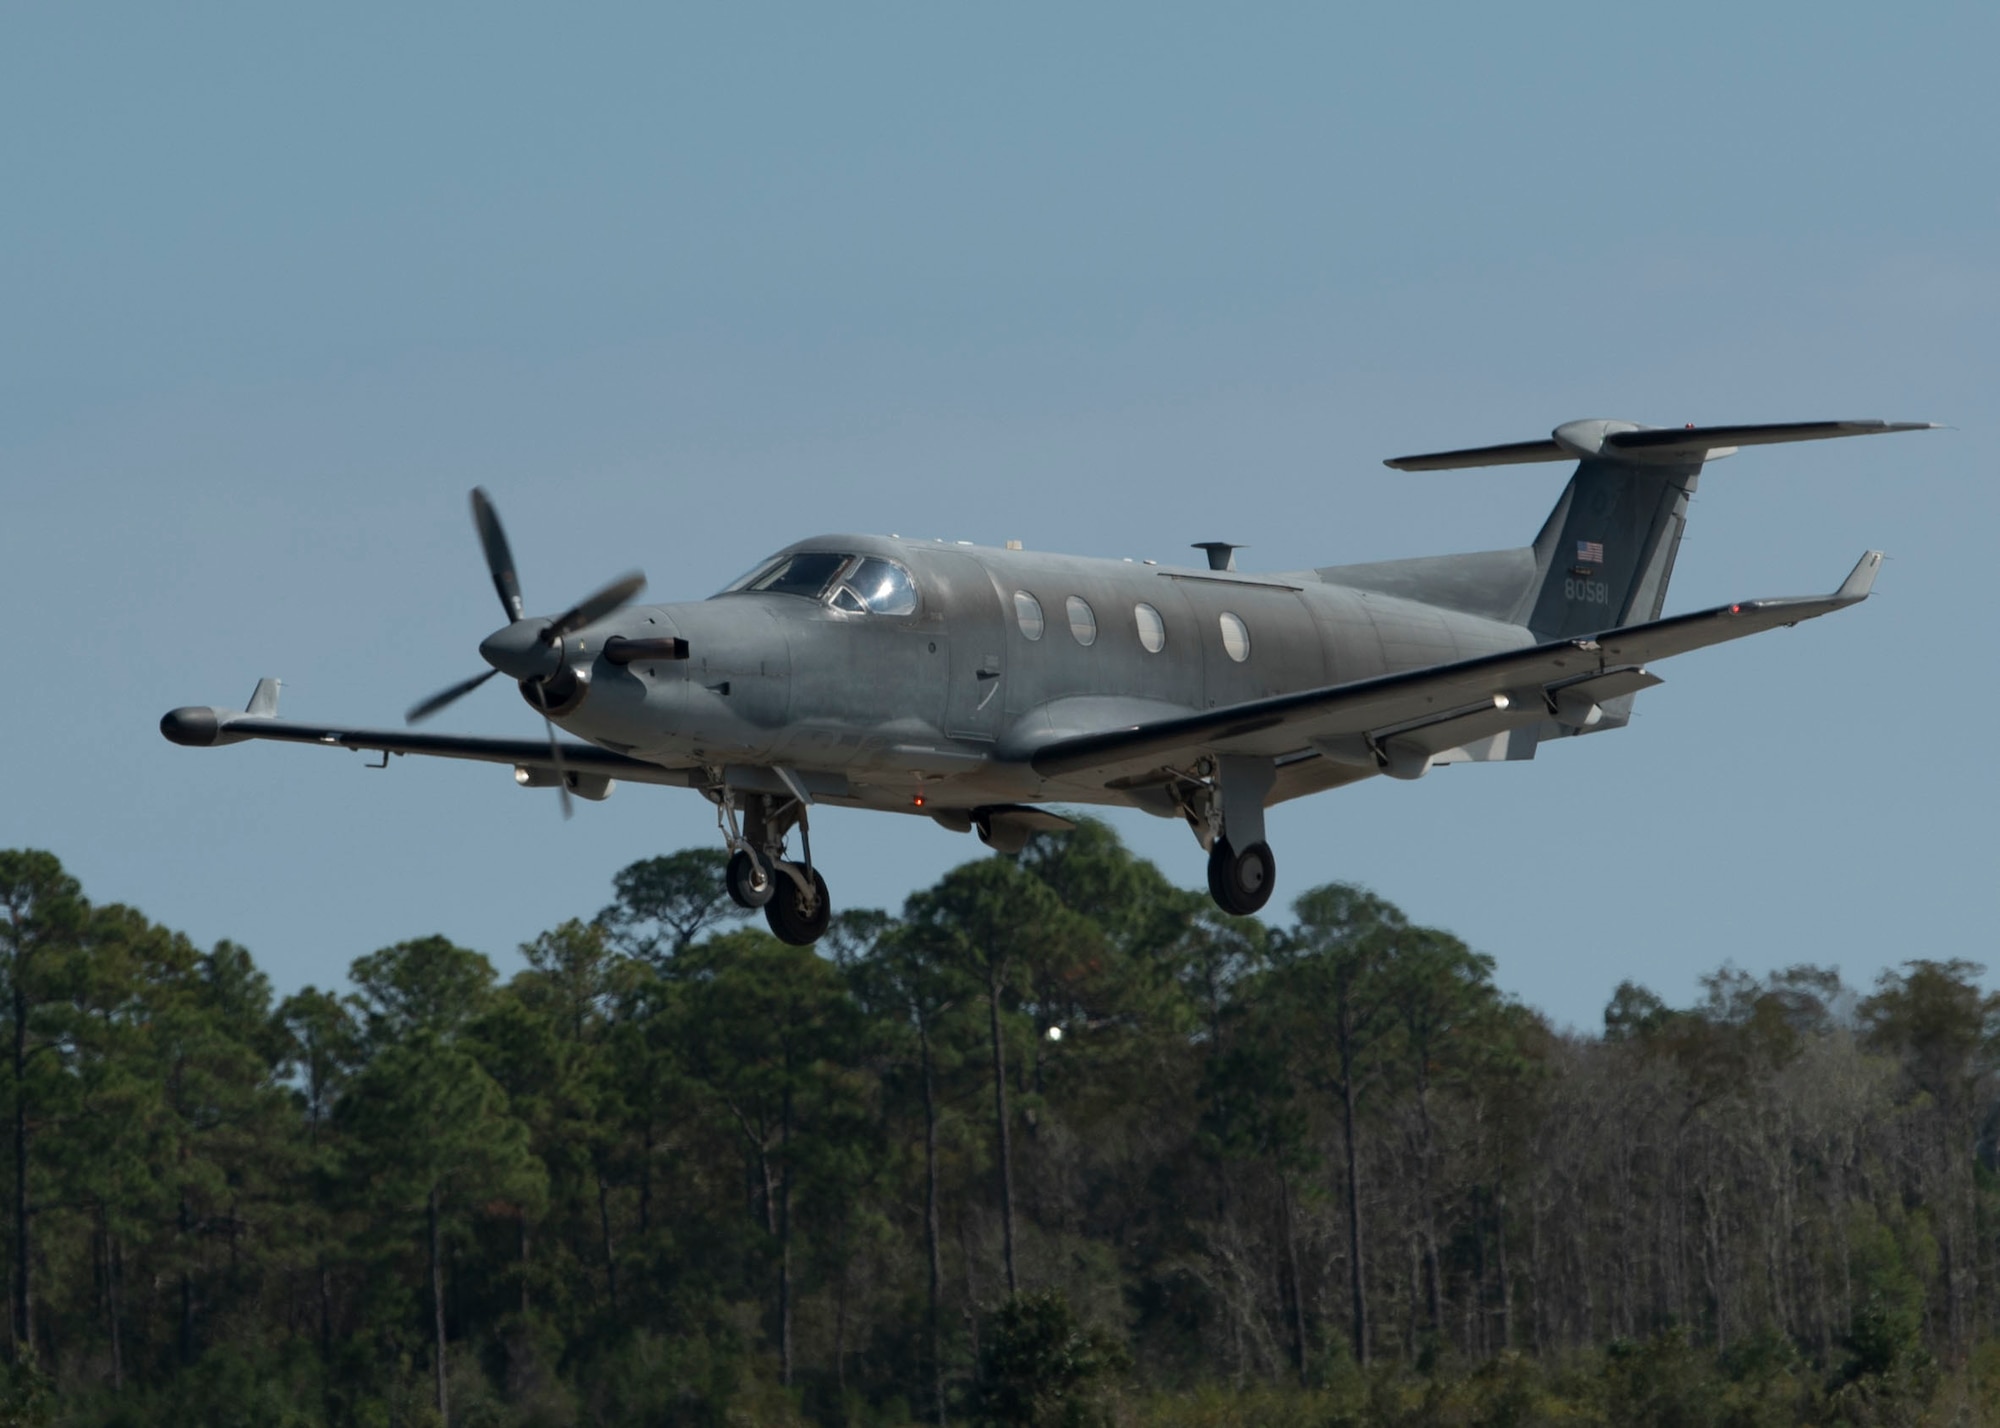 A U-28A fixed-wing aircraft, assigned to the 34th Special Operations Squadron, takes off from Hurlburt Field, Florida, Oct. 18, 2018. The U-28A provides airborne intelligence, surveillance and reconnaissance in support of humanitarian operations, search and rescue, and special operations missions. (U.S. Air Force photo by Airman 1st Class Joel Miller)